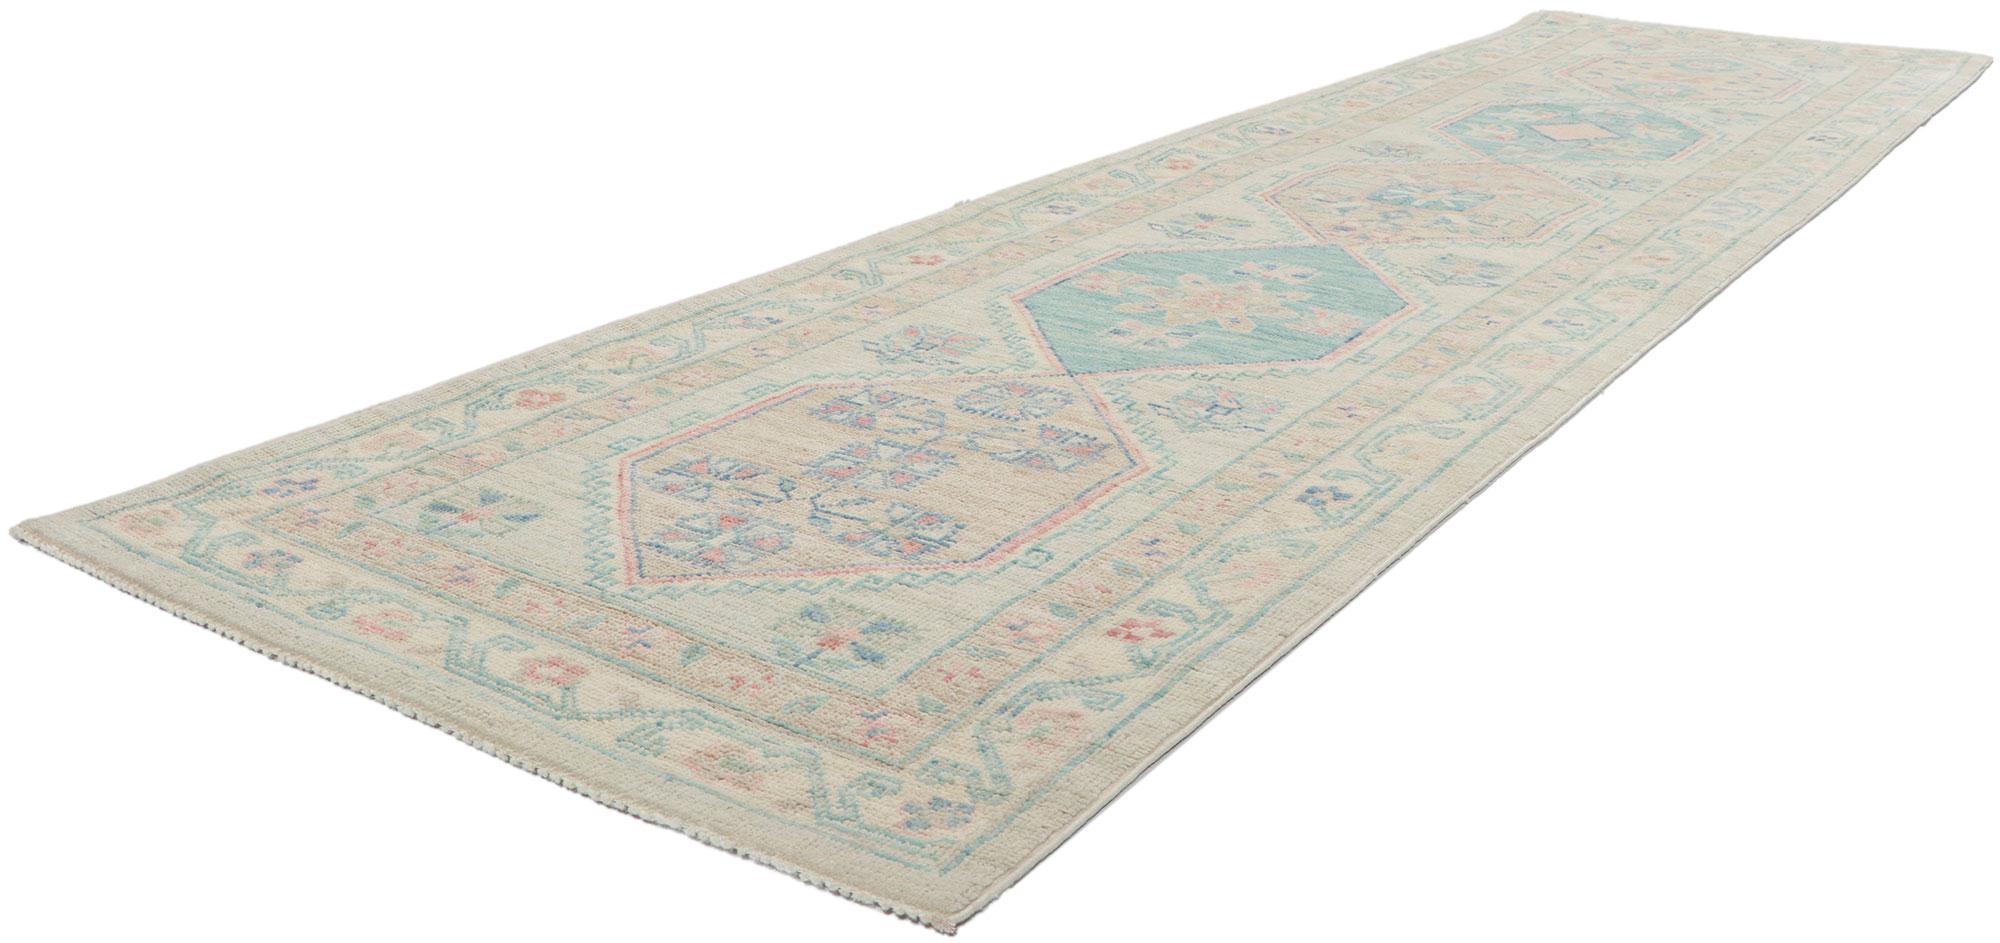 80836 New contemporary oushak runner with soft colors, 02'09 x 10'03. The classic style and soft colors are tranquil and sophisticated. With its timeless design and understated elegance, this versatile Oushak carpet runner will create a welcoming